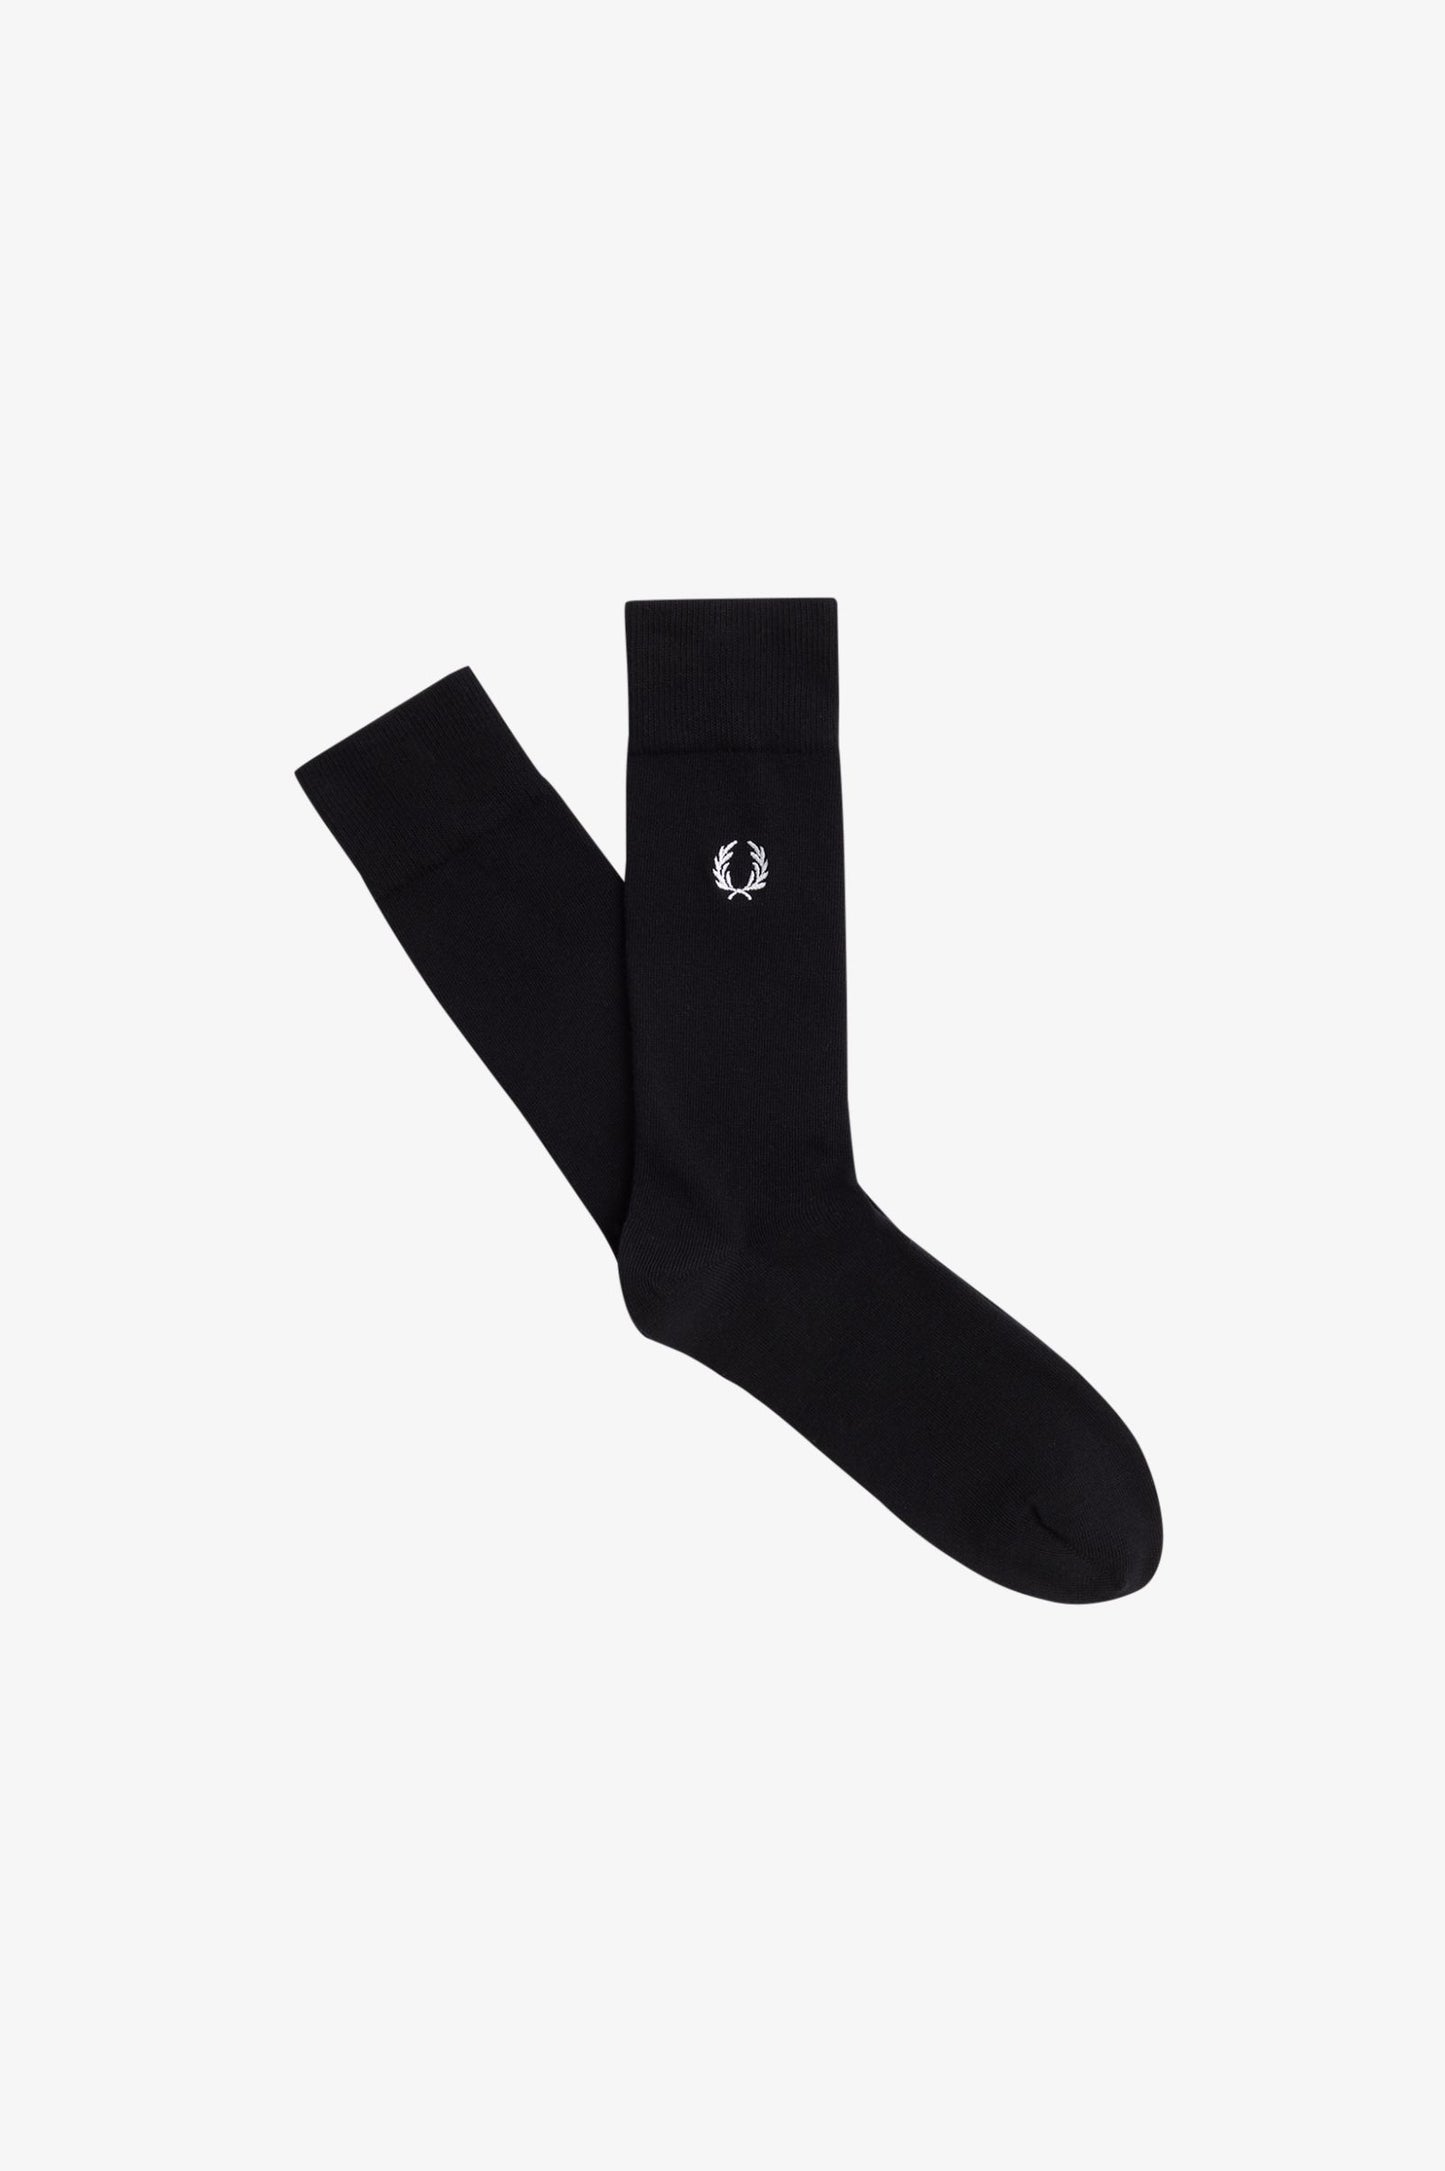 Fred Perry Classic Laurel Wreath Sock Black / Snow White